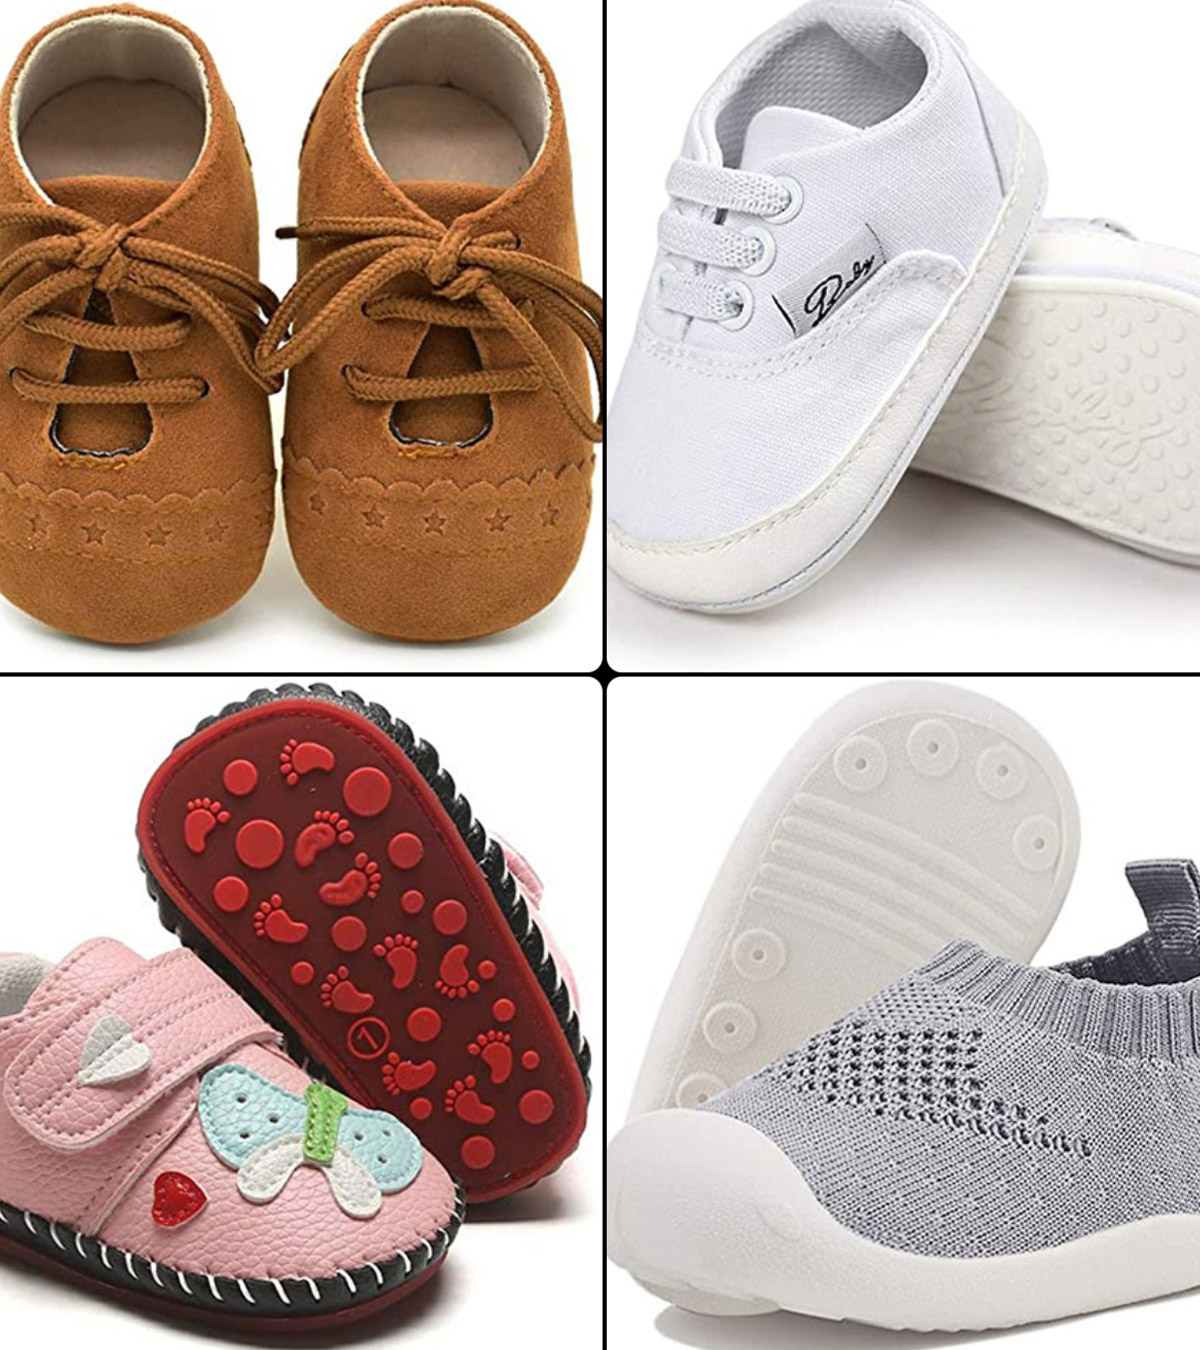 The Best Baby Walking Shoes  Top Rated Shoes for Babies Learning to Walk